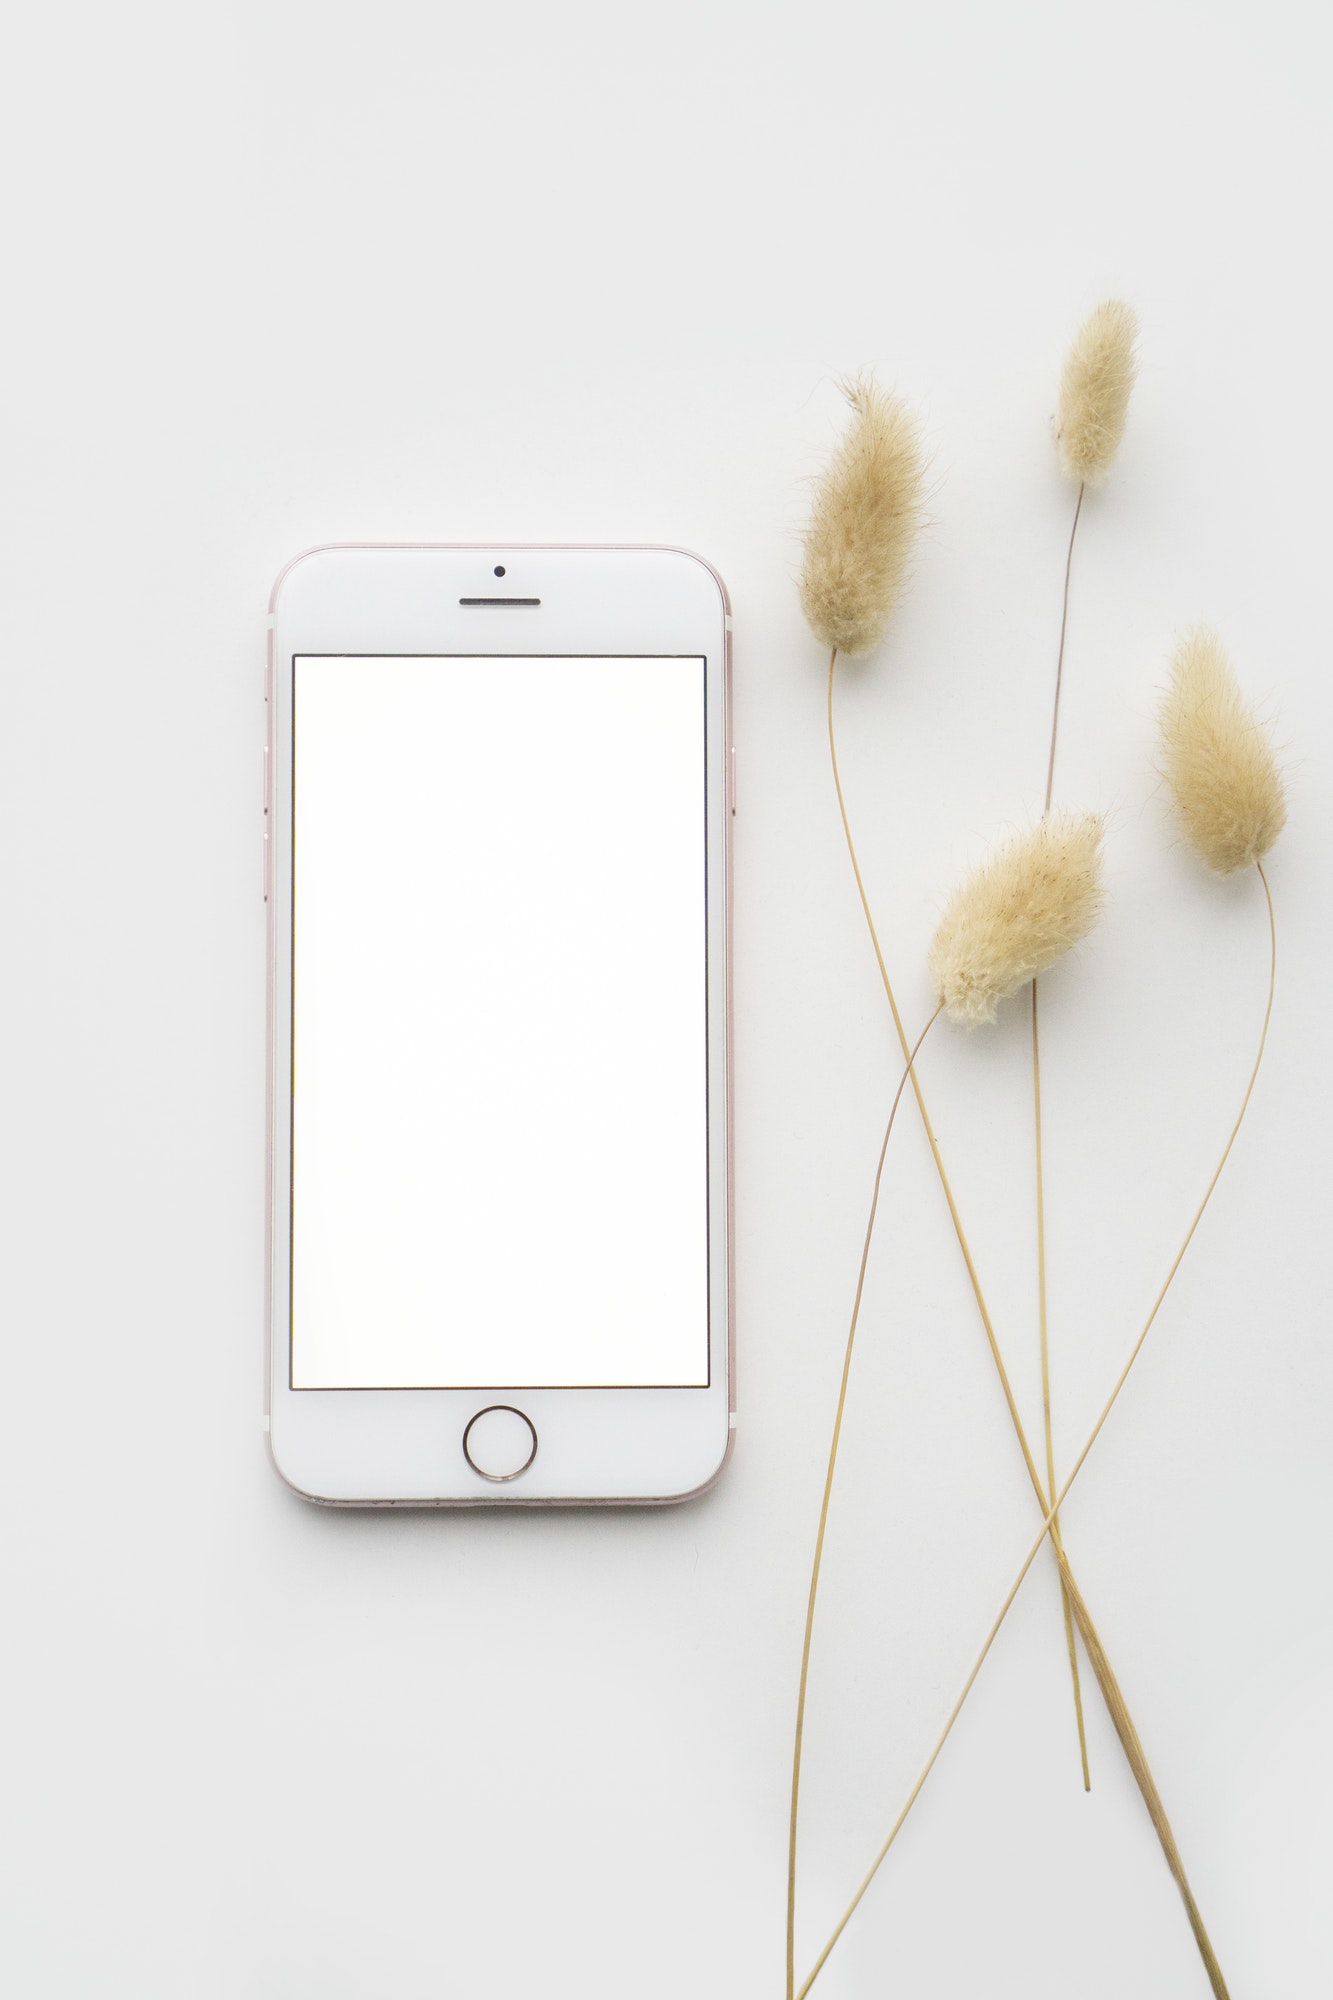 Iphone 6 on White Surface